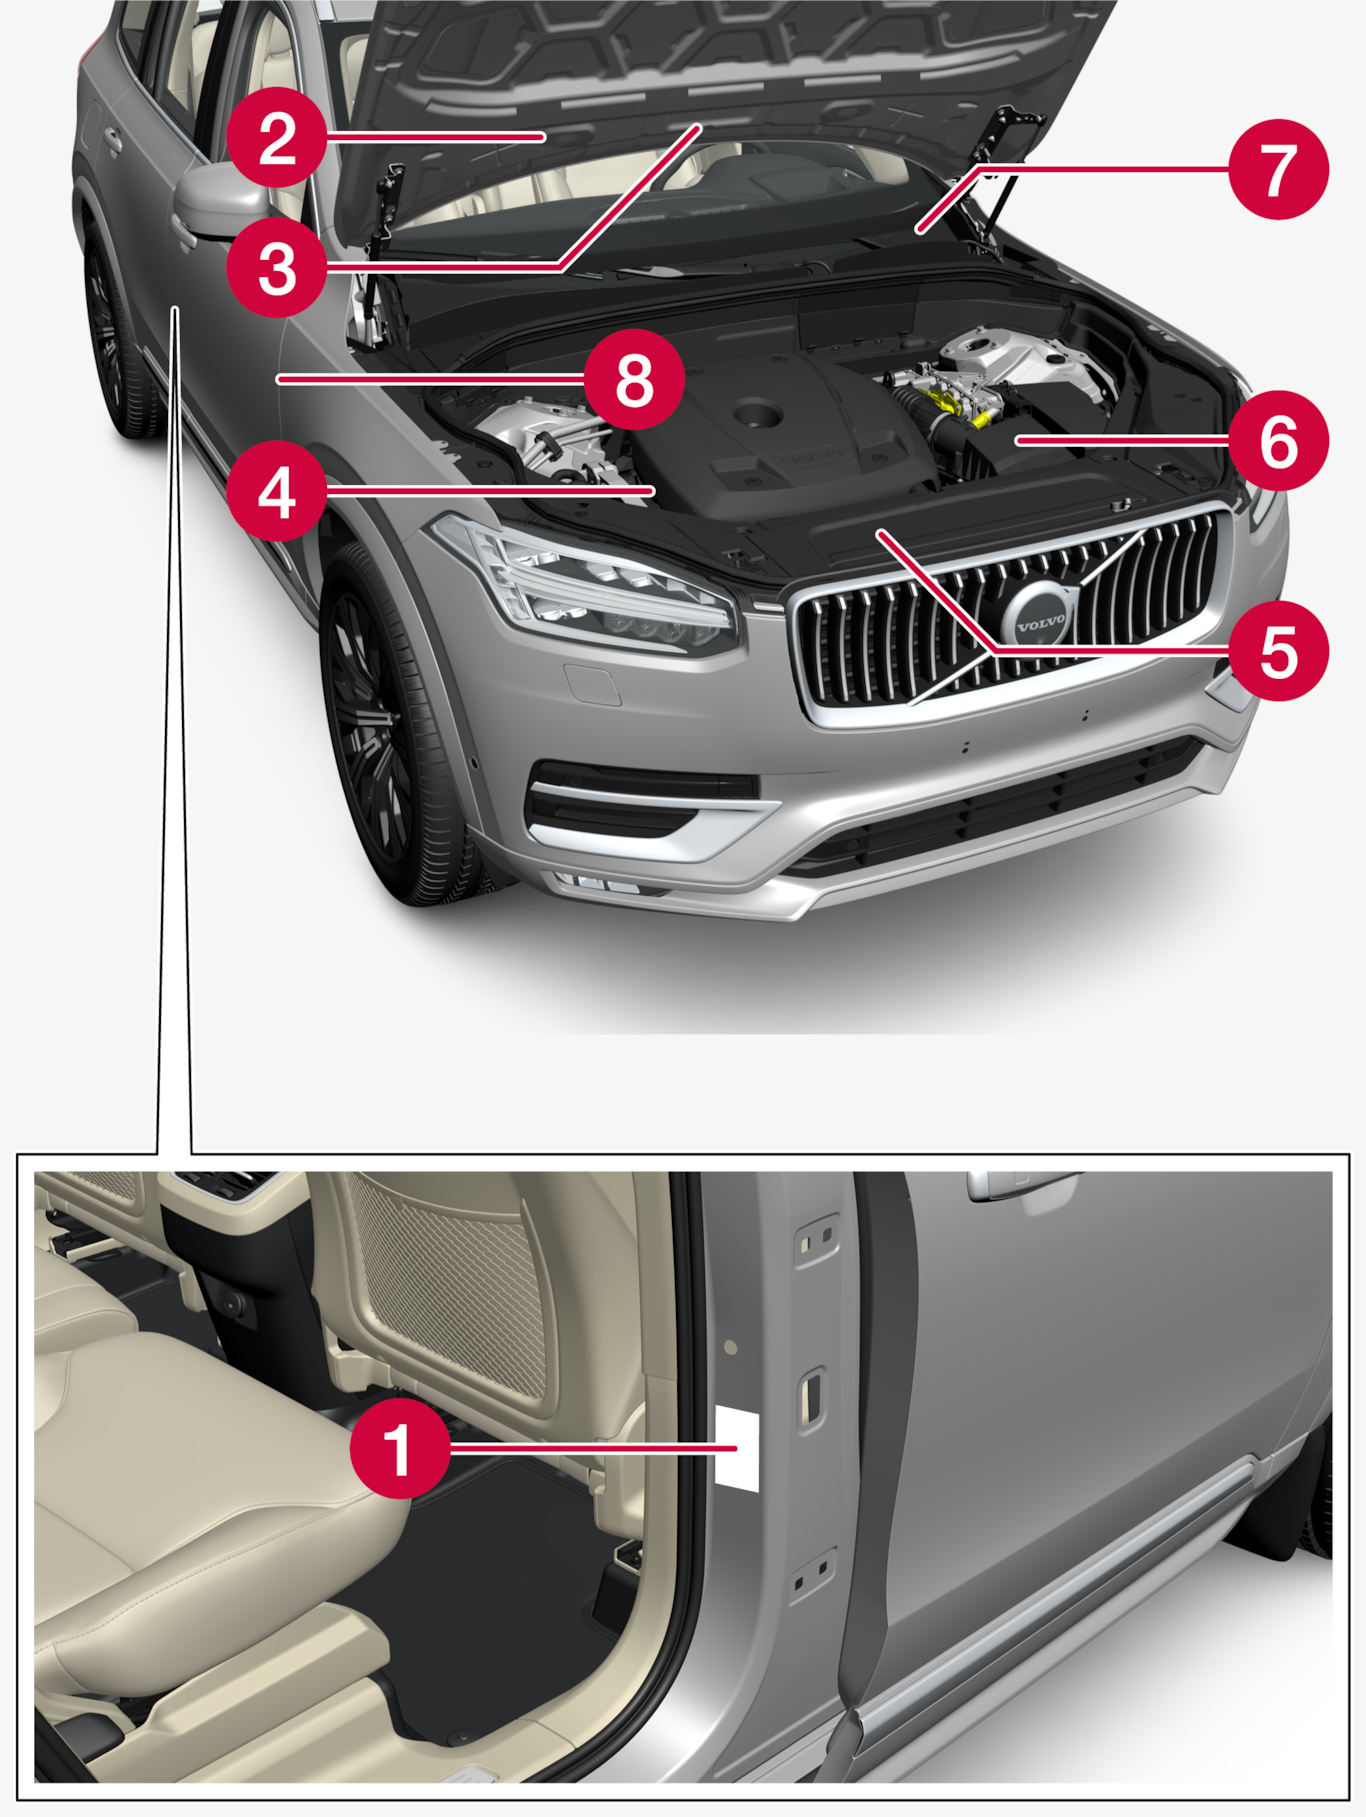 P5-2222-XC90-Type approval, labels, vehicles for China and Korea